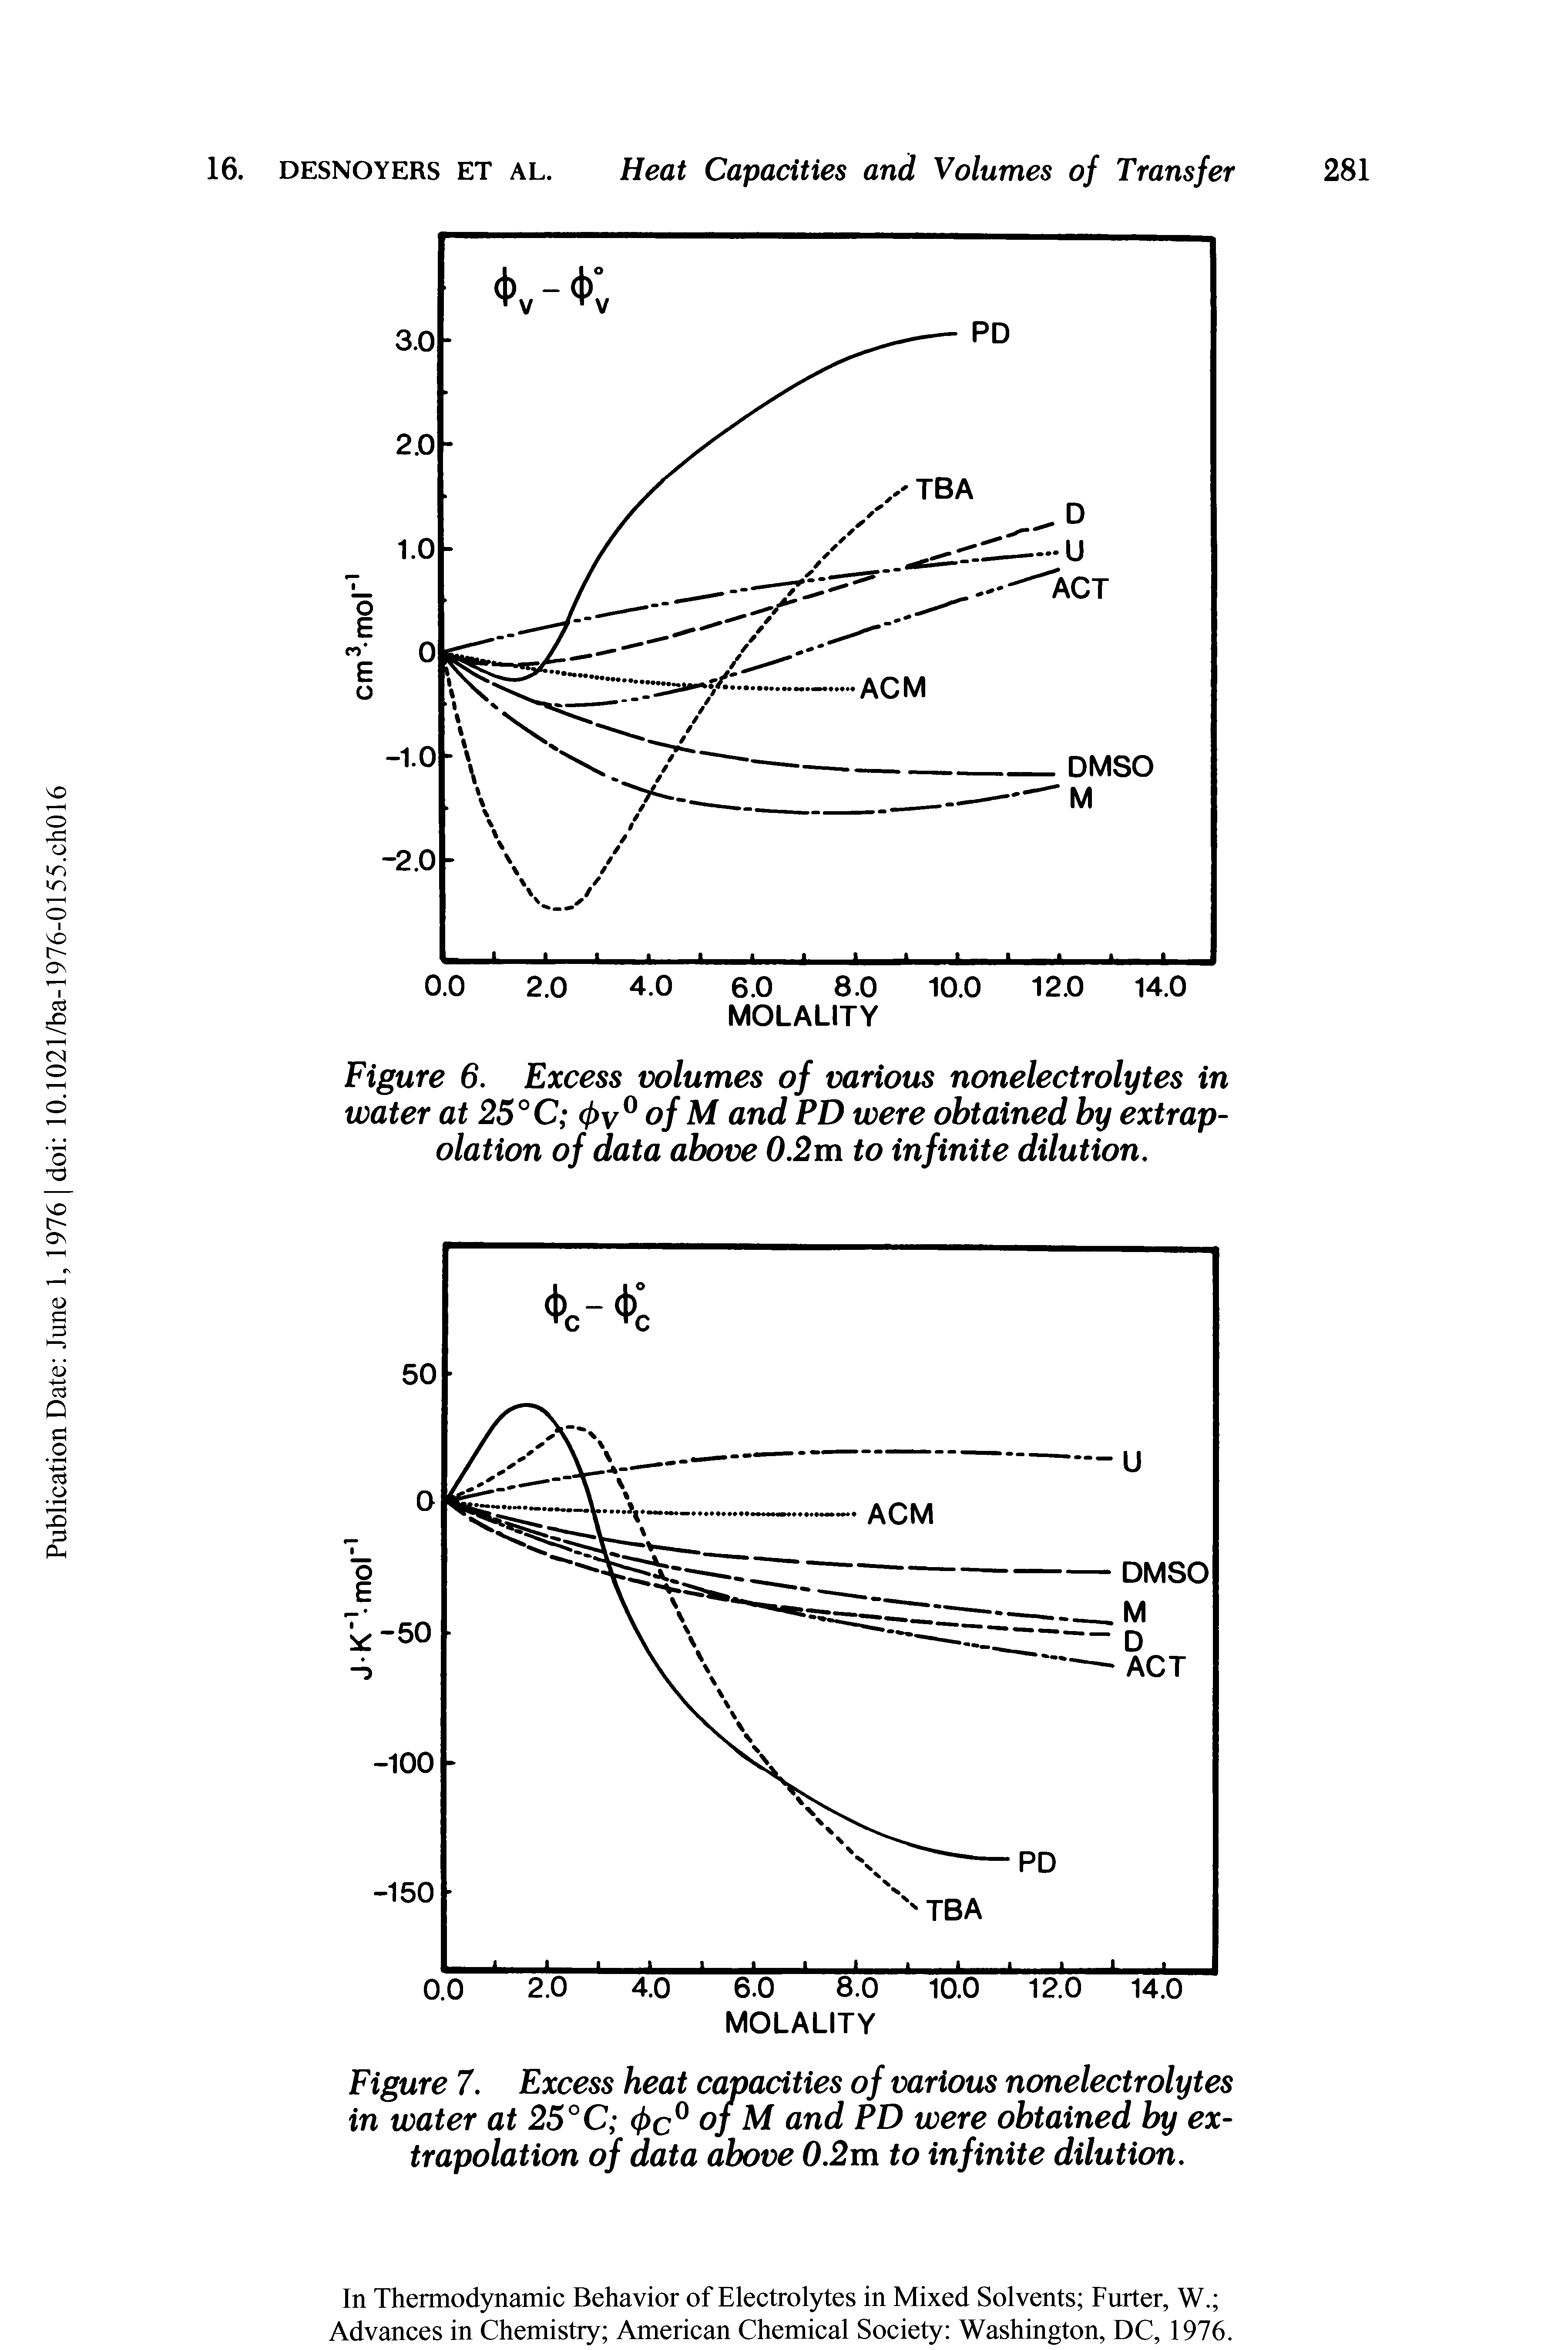 Figure 7. Excess heat capacities of various nonelectrolytes in water at 25°C 0c° ofM and PD were obtained by extrapolation of data above 0.2m to infinite dilution.